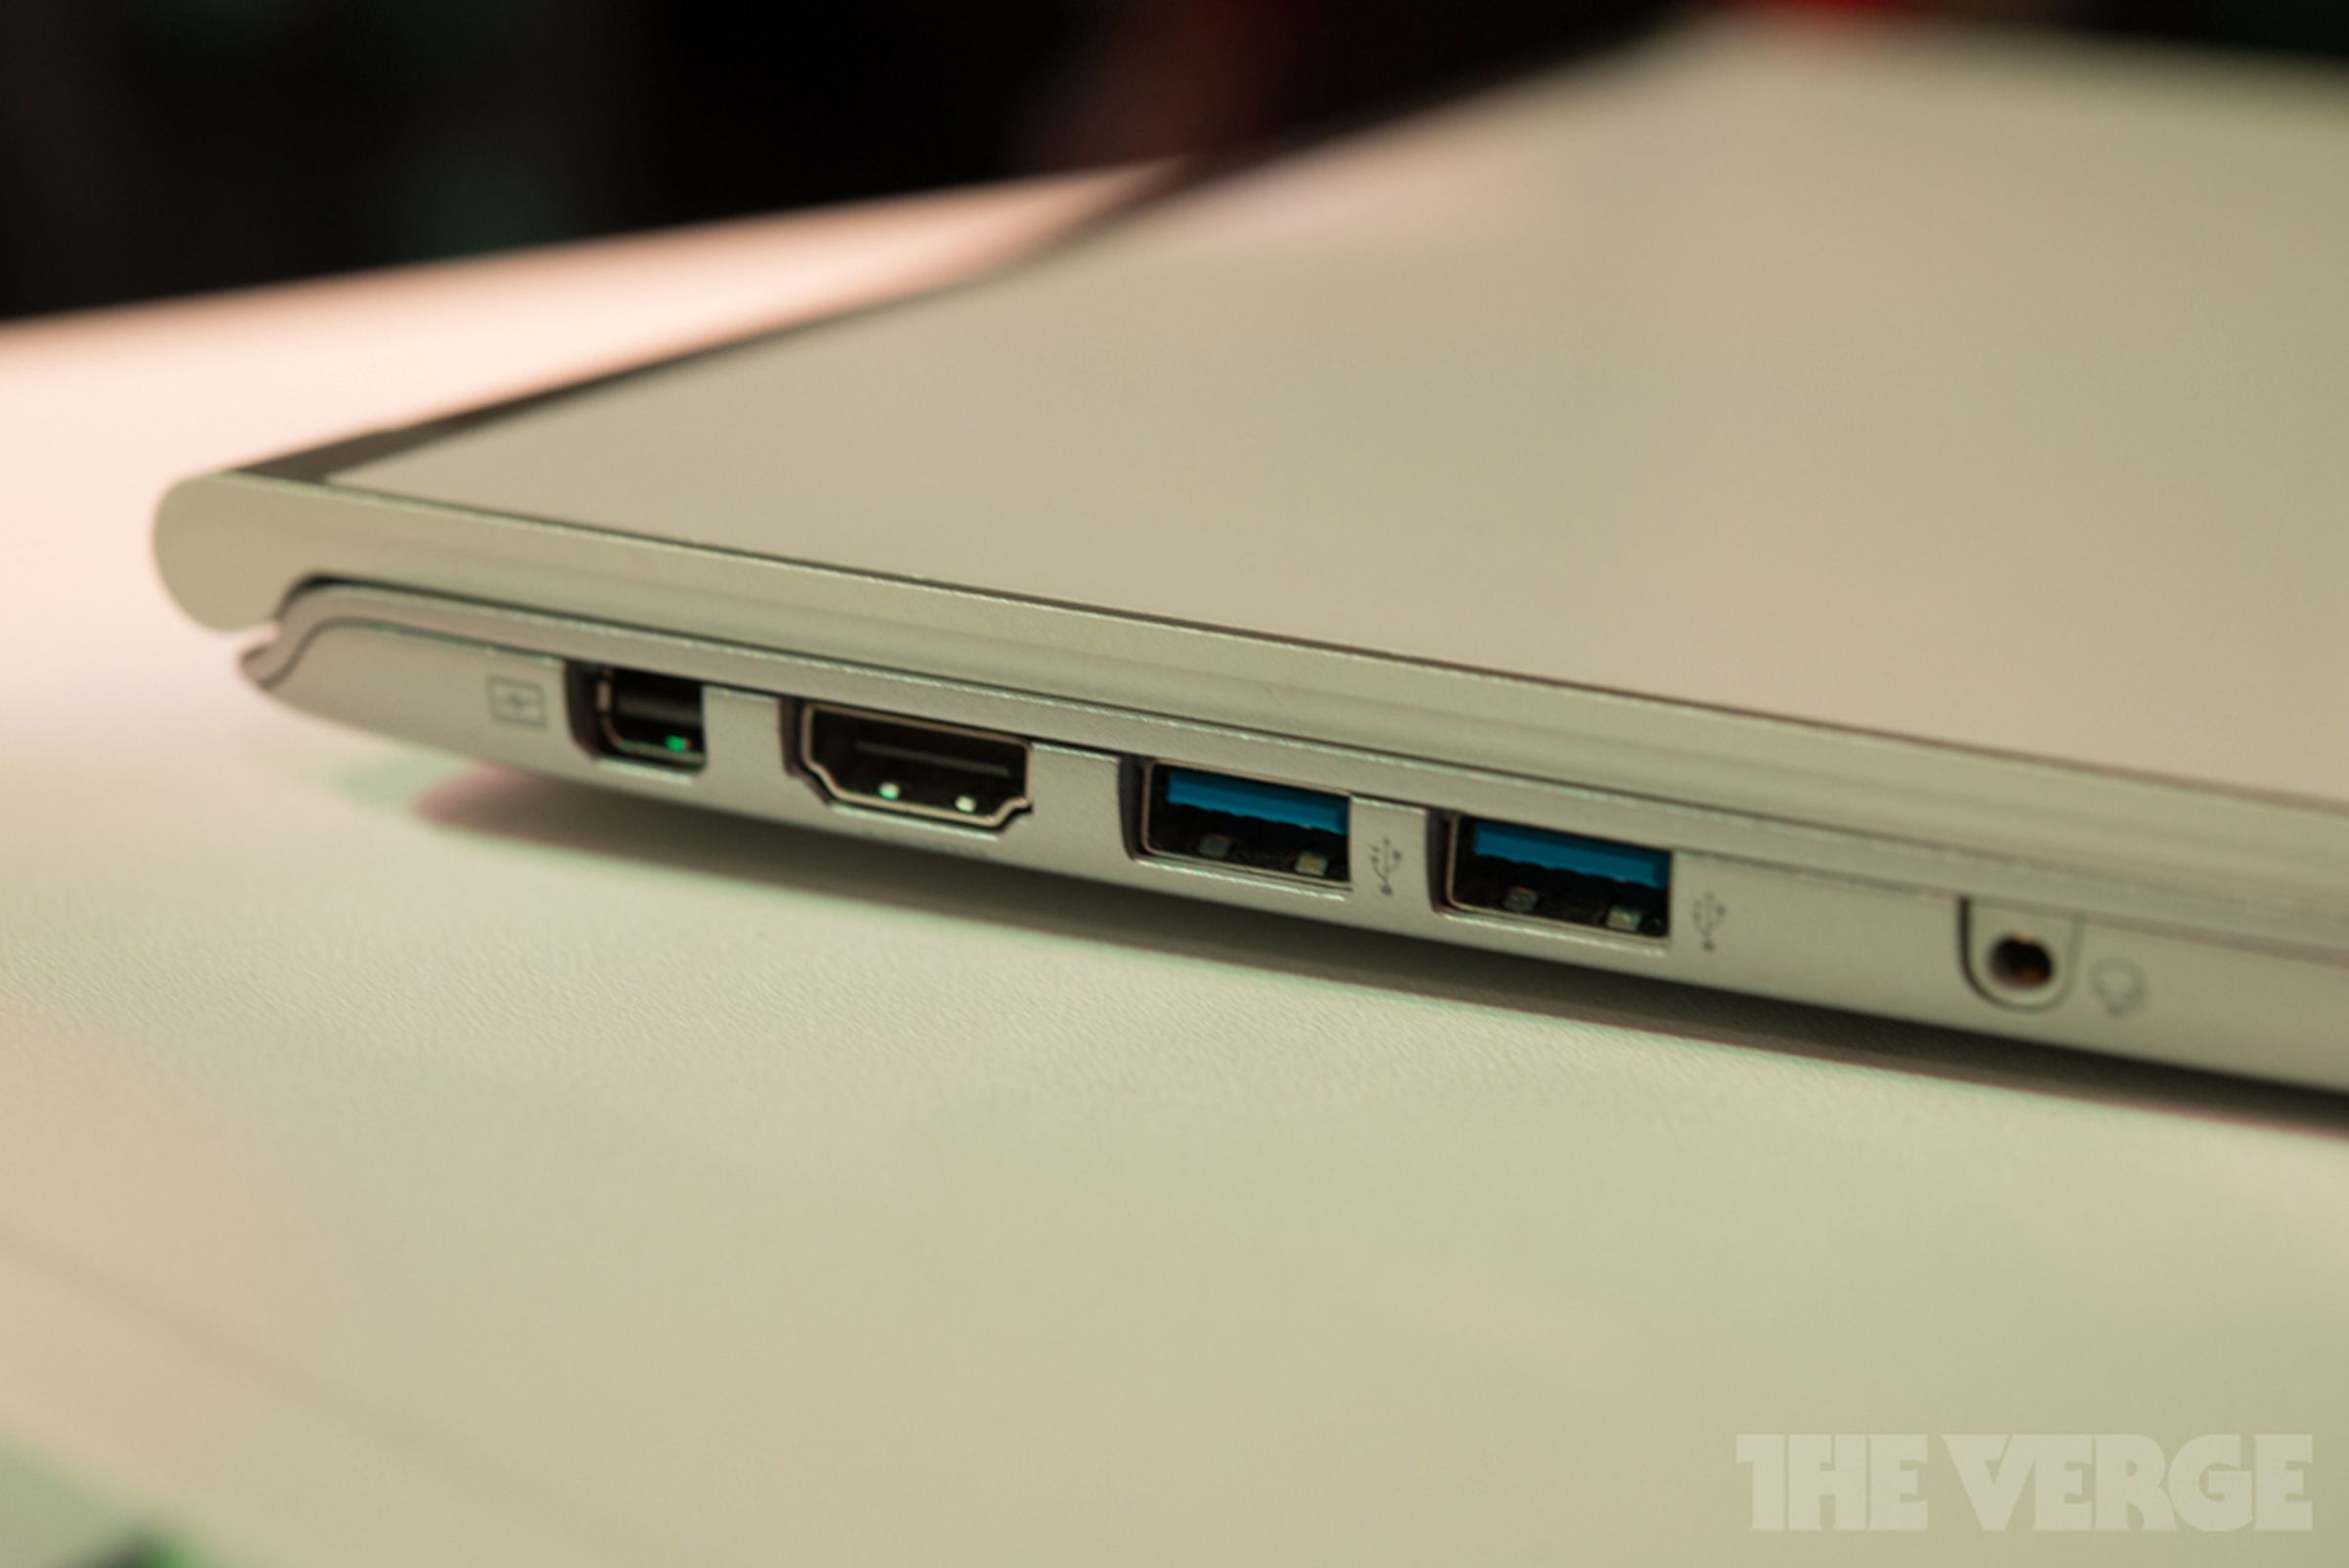 Acer Aspire S3 hands-on pictures